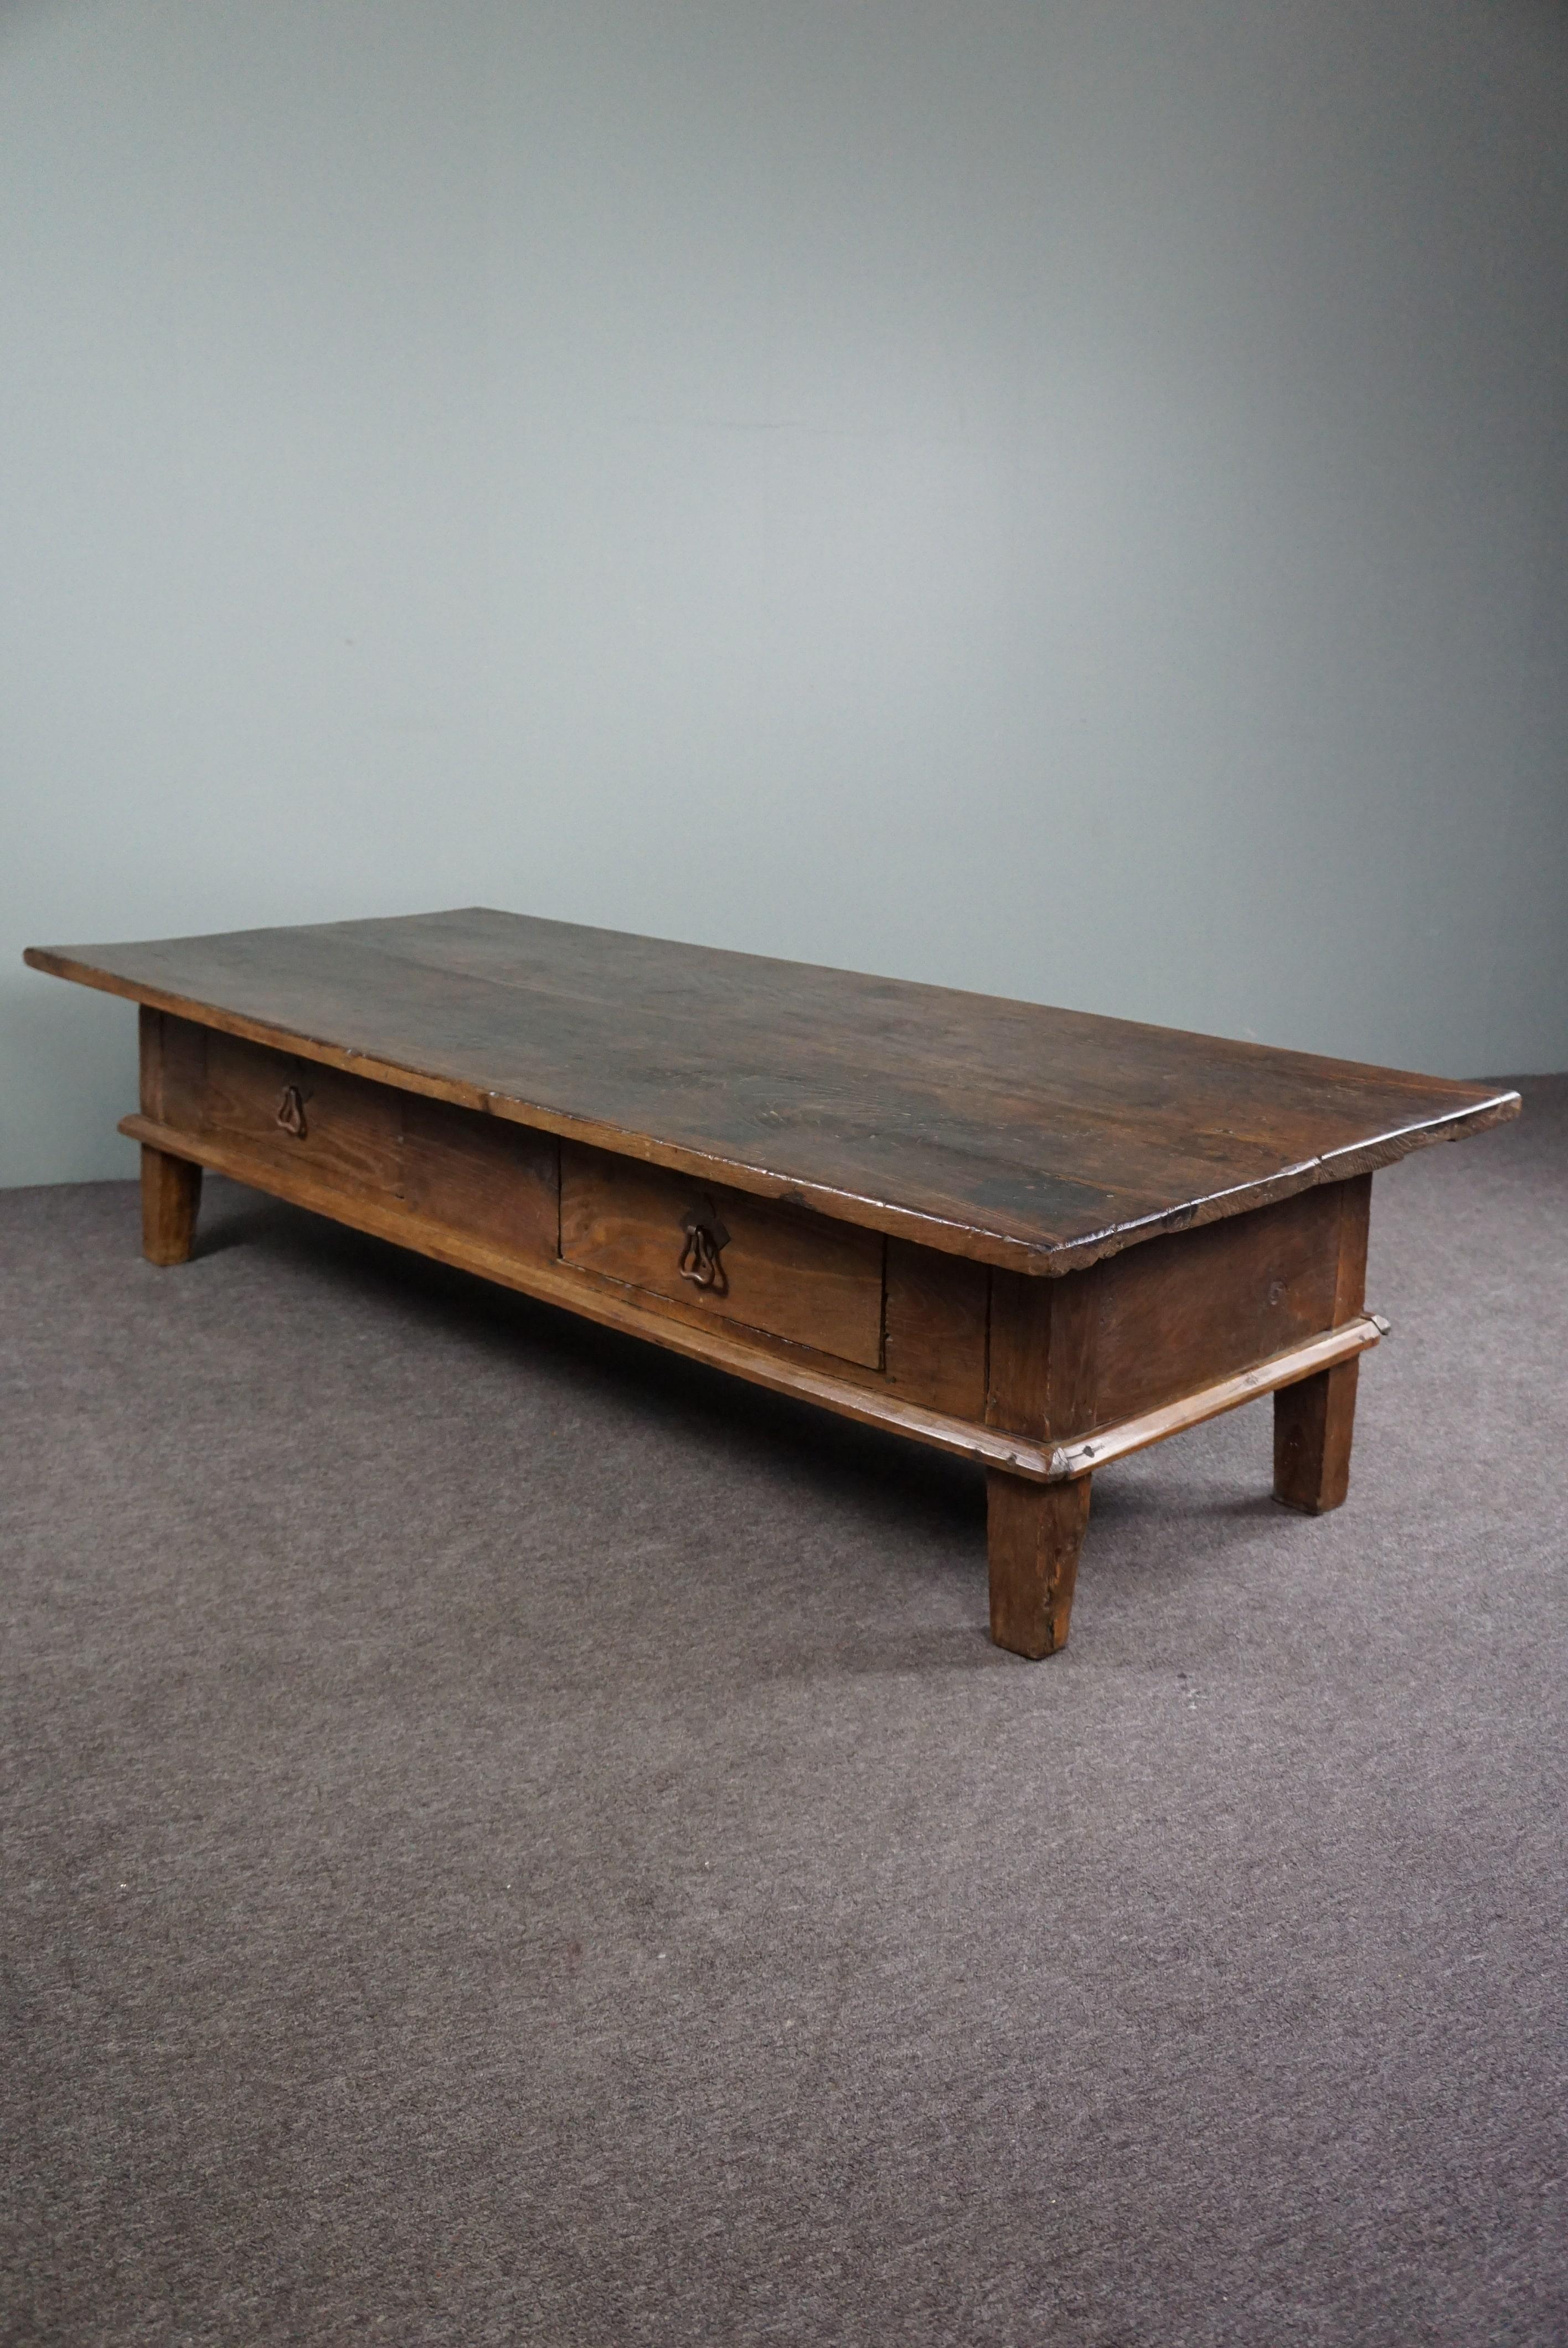 We are proud to present this robust and well-lived antique coffee table to you. This beautiful South European late 18th-century coffee table features two drawers, a rich dark color, and an amazing patina.

Not only does this coffee table provide